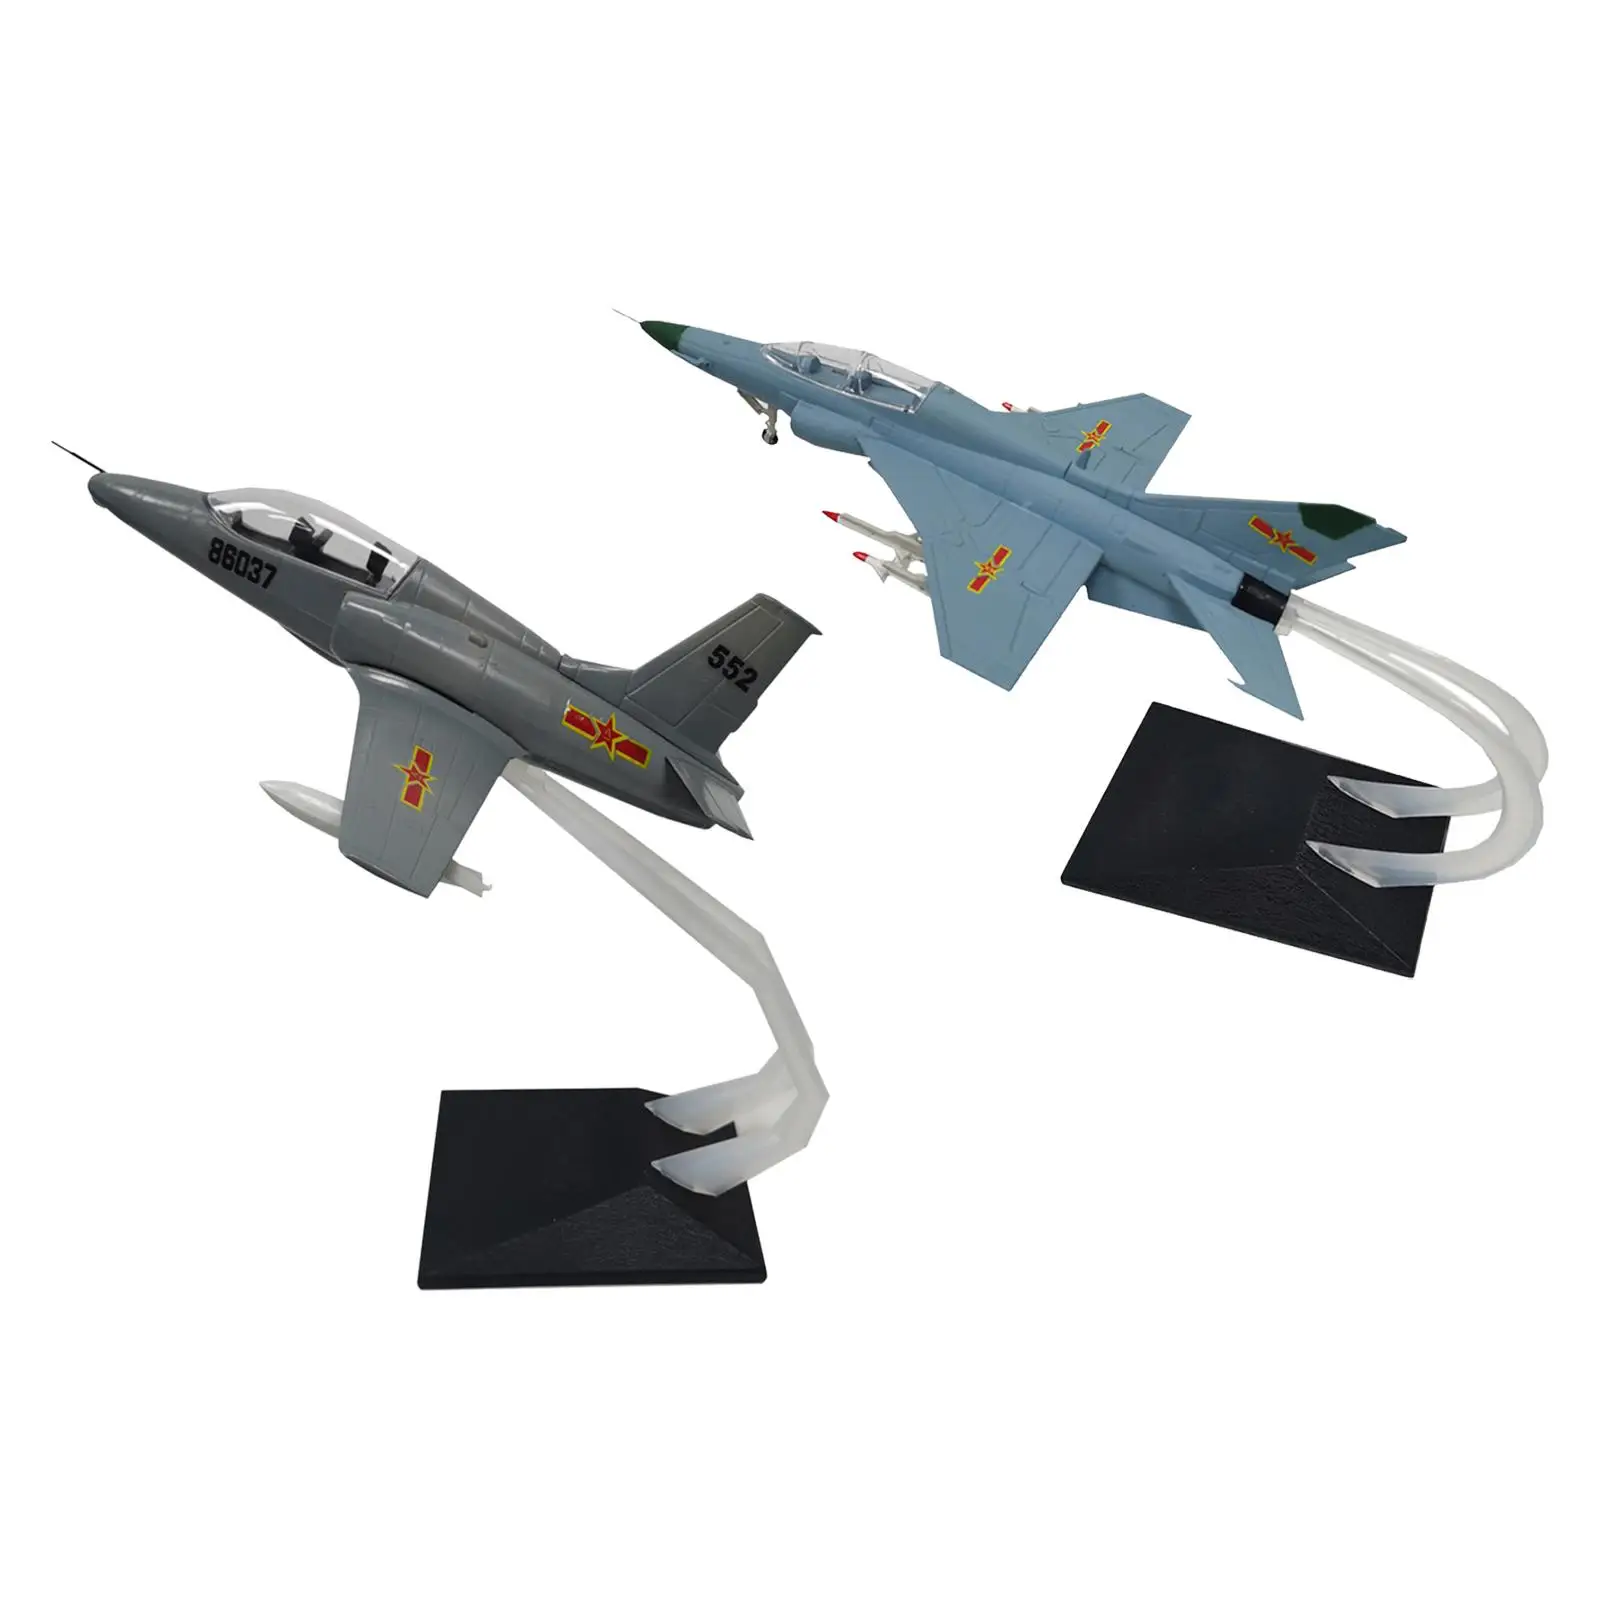 Alloy Metal Aircraft Toy Souvenir Fighter Model 1/48 Scale Diecast Model Planes for Bookshelf Office Countertop Cabinet Bedroom